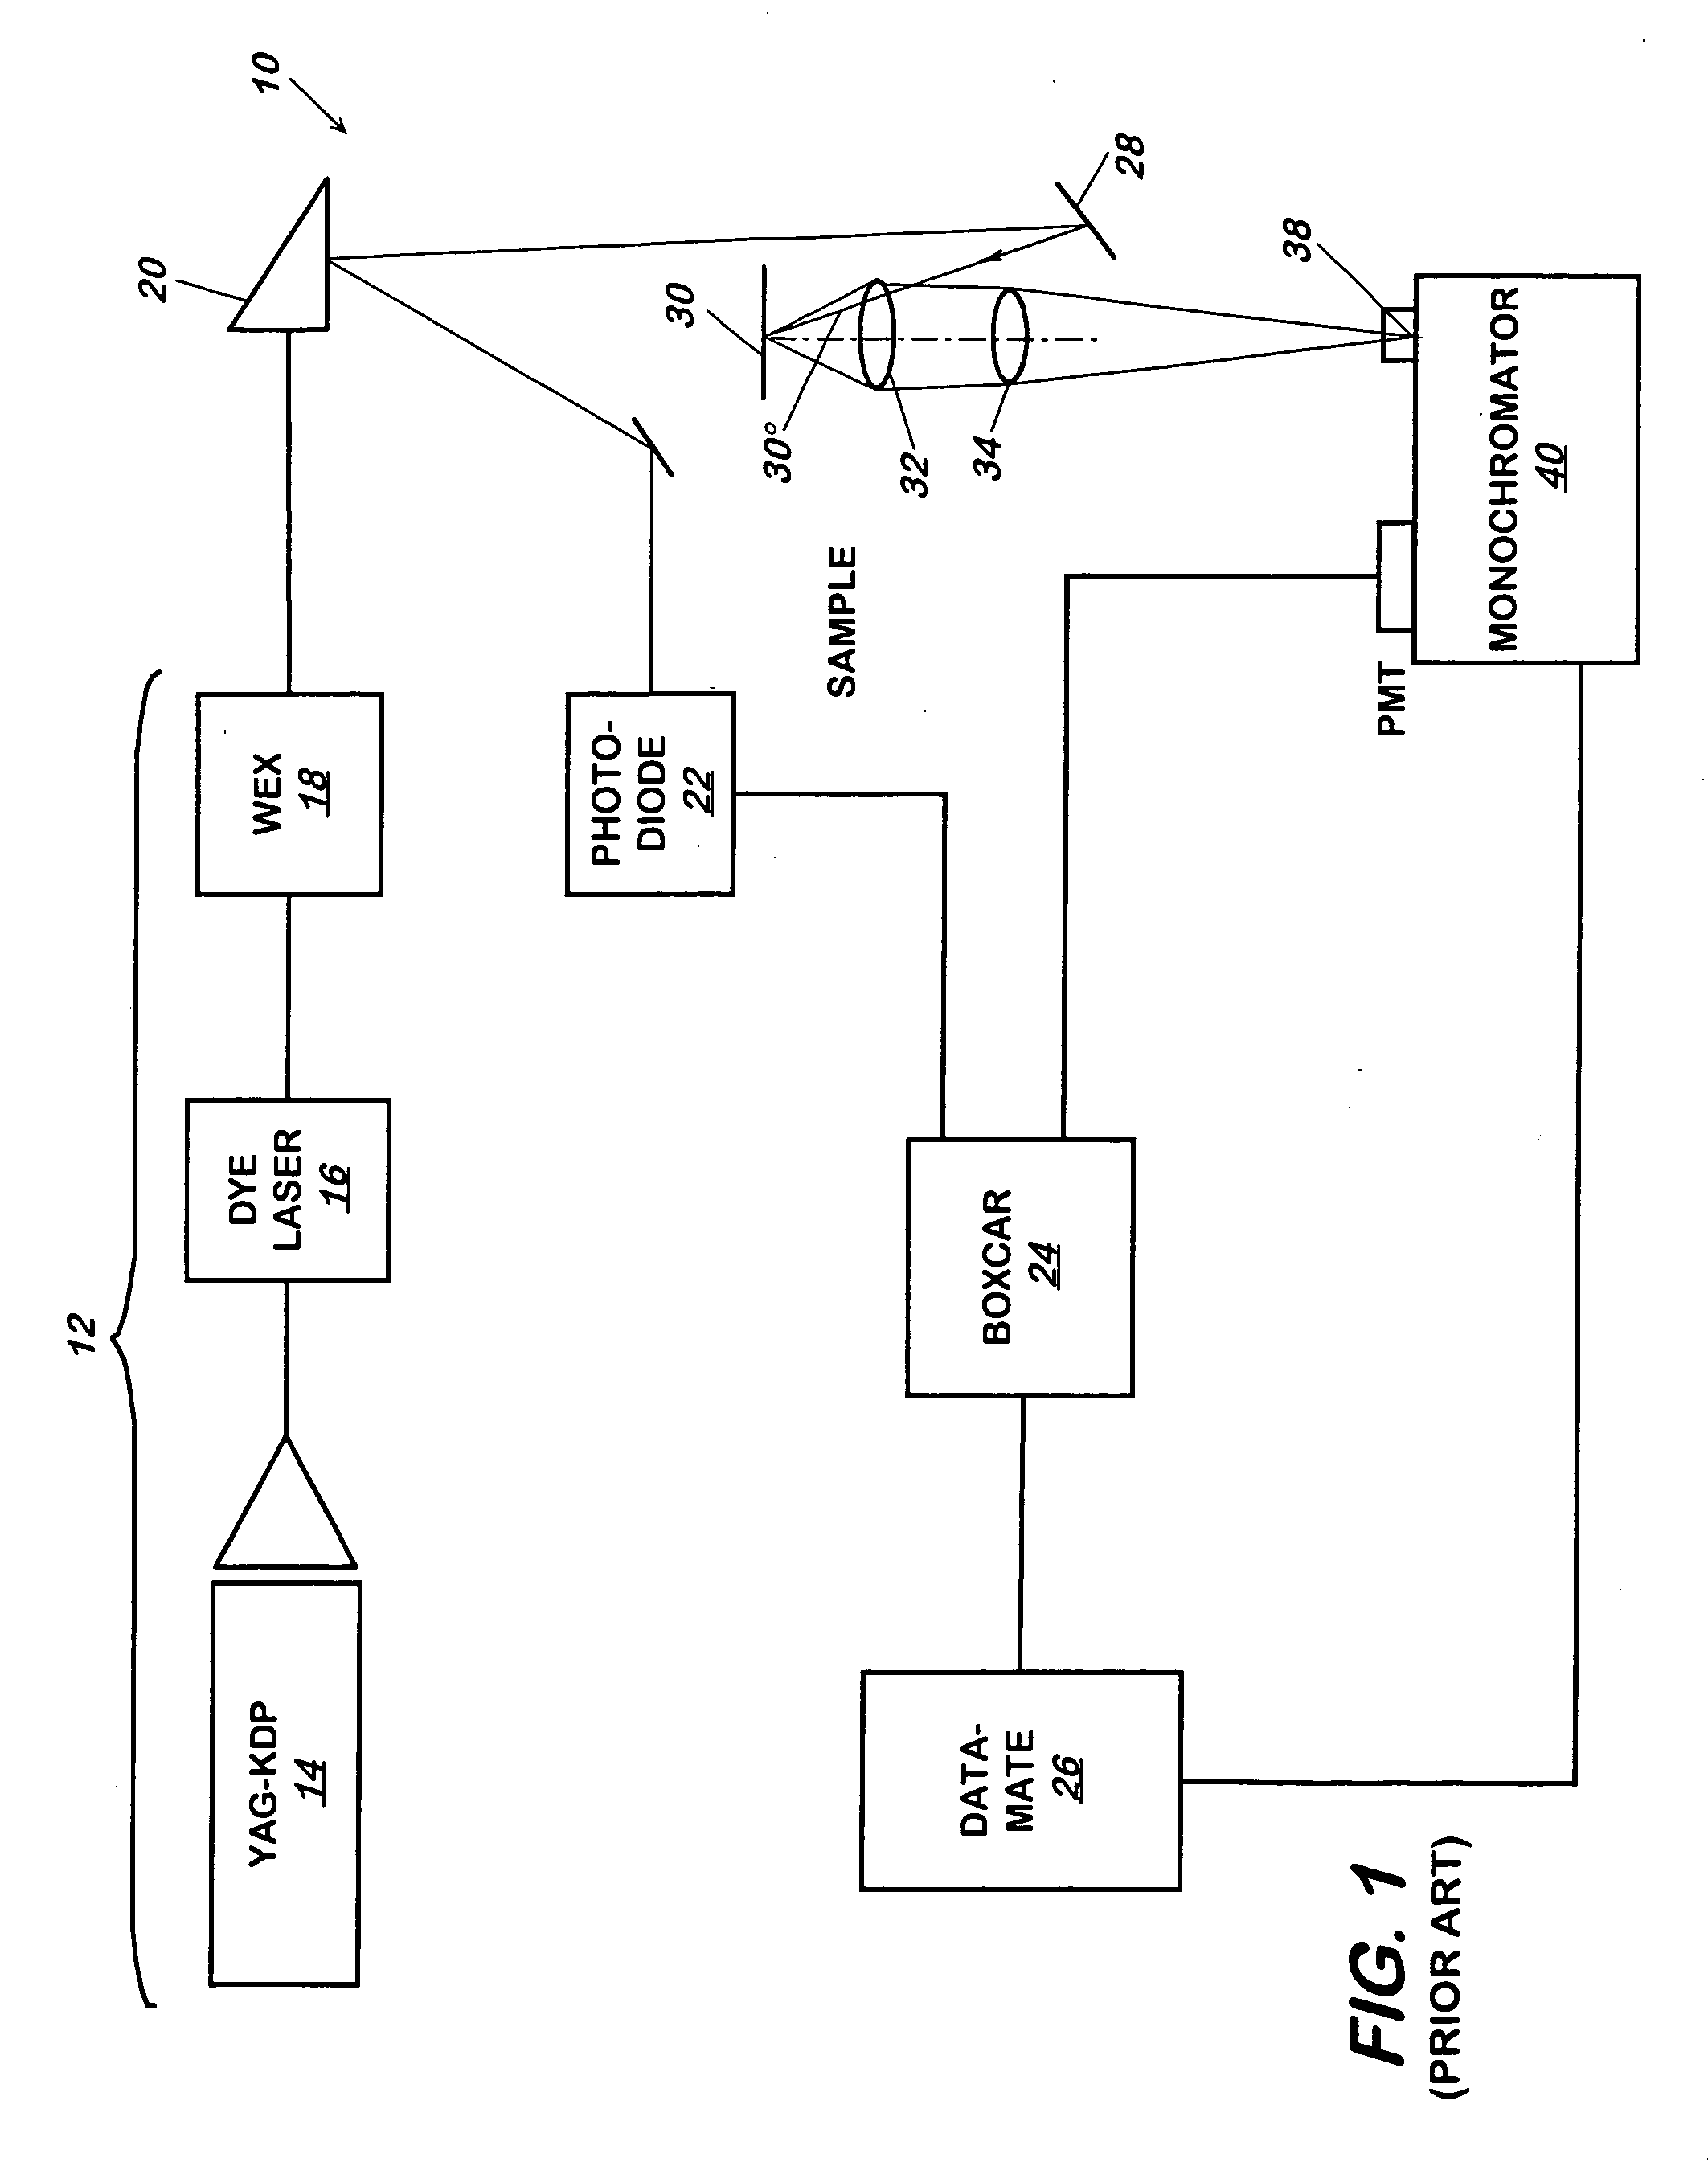 Method and apparatus for identifying a substance using a spectral library database